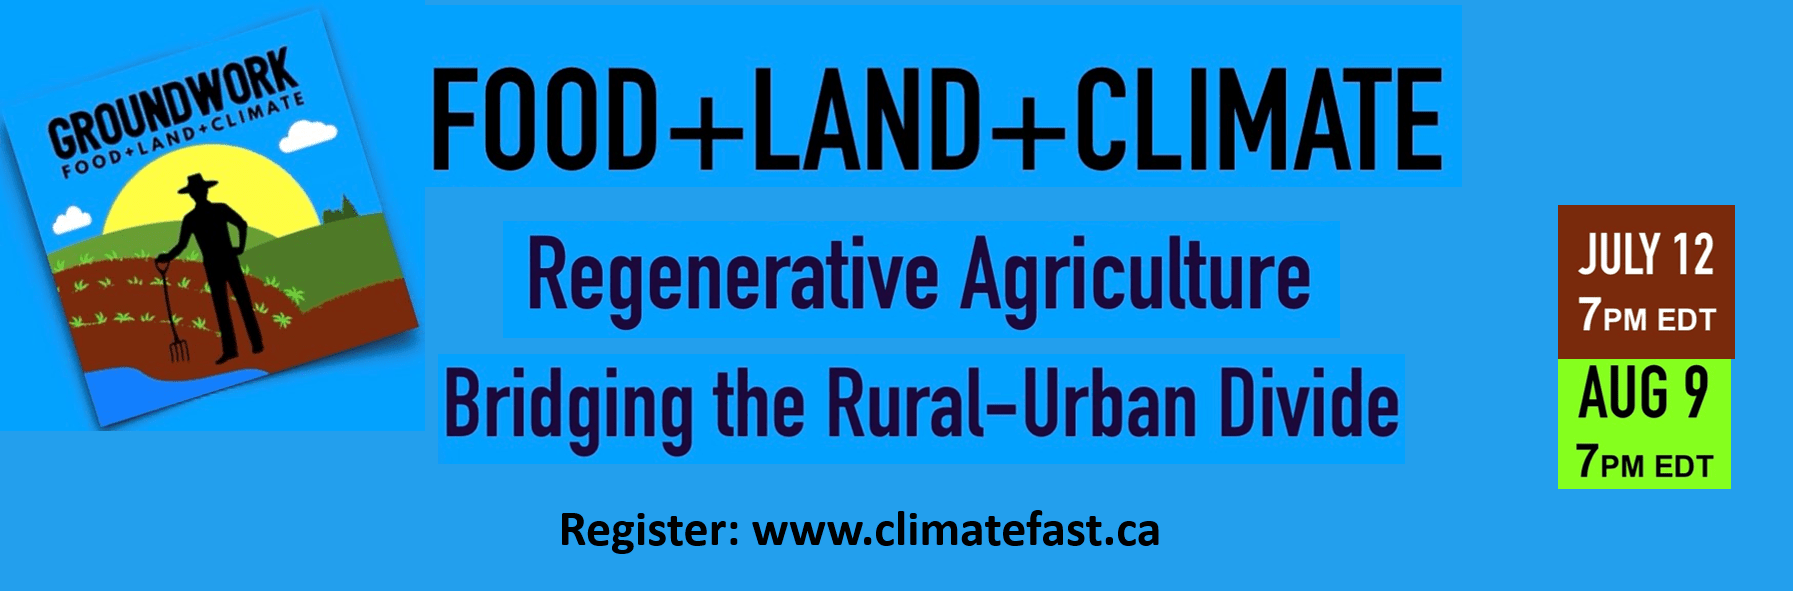 Food, Land and Climate logo with dates and titles of upcoming webcasts